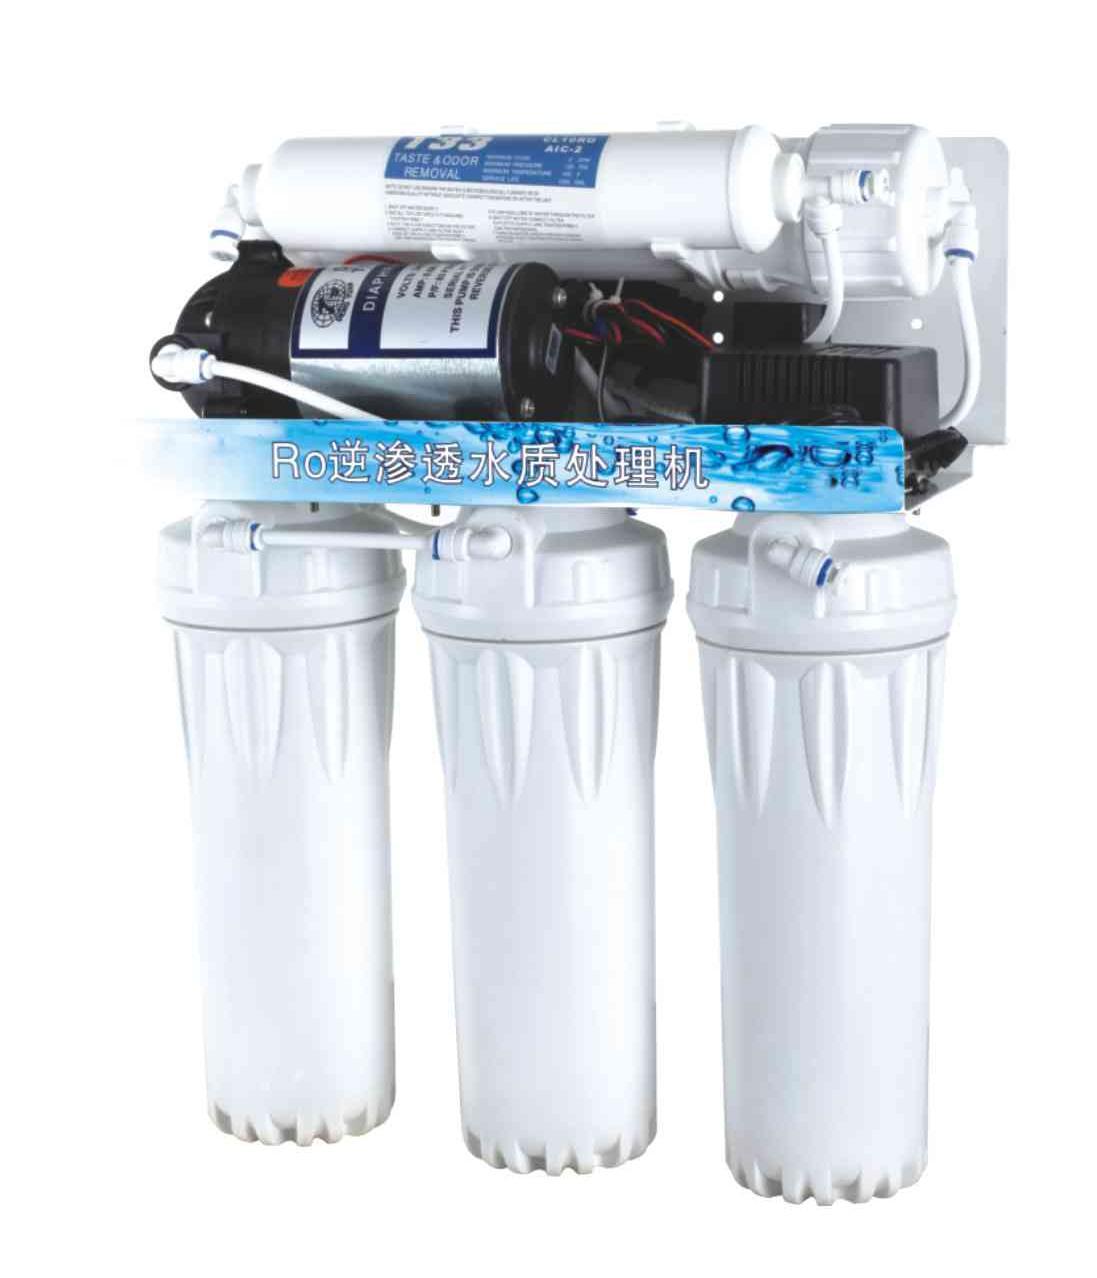  Water Filter (Handsel-ROZ-50A) Manufactures